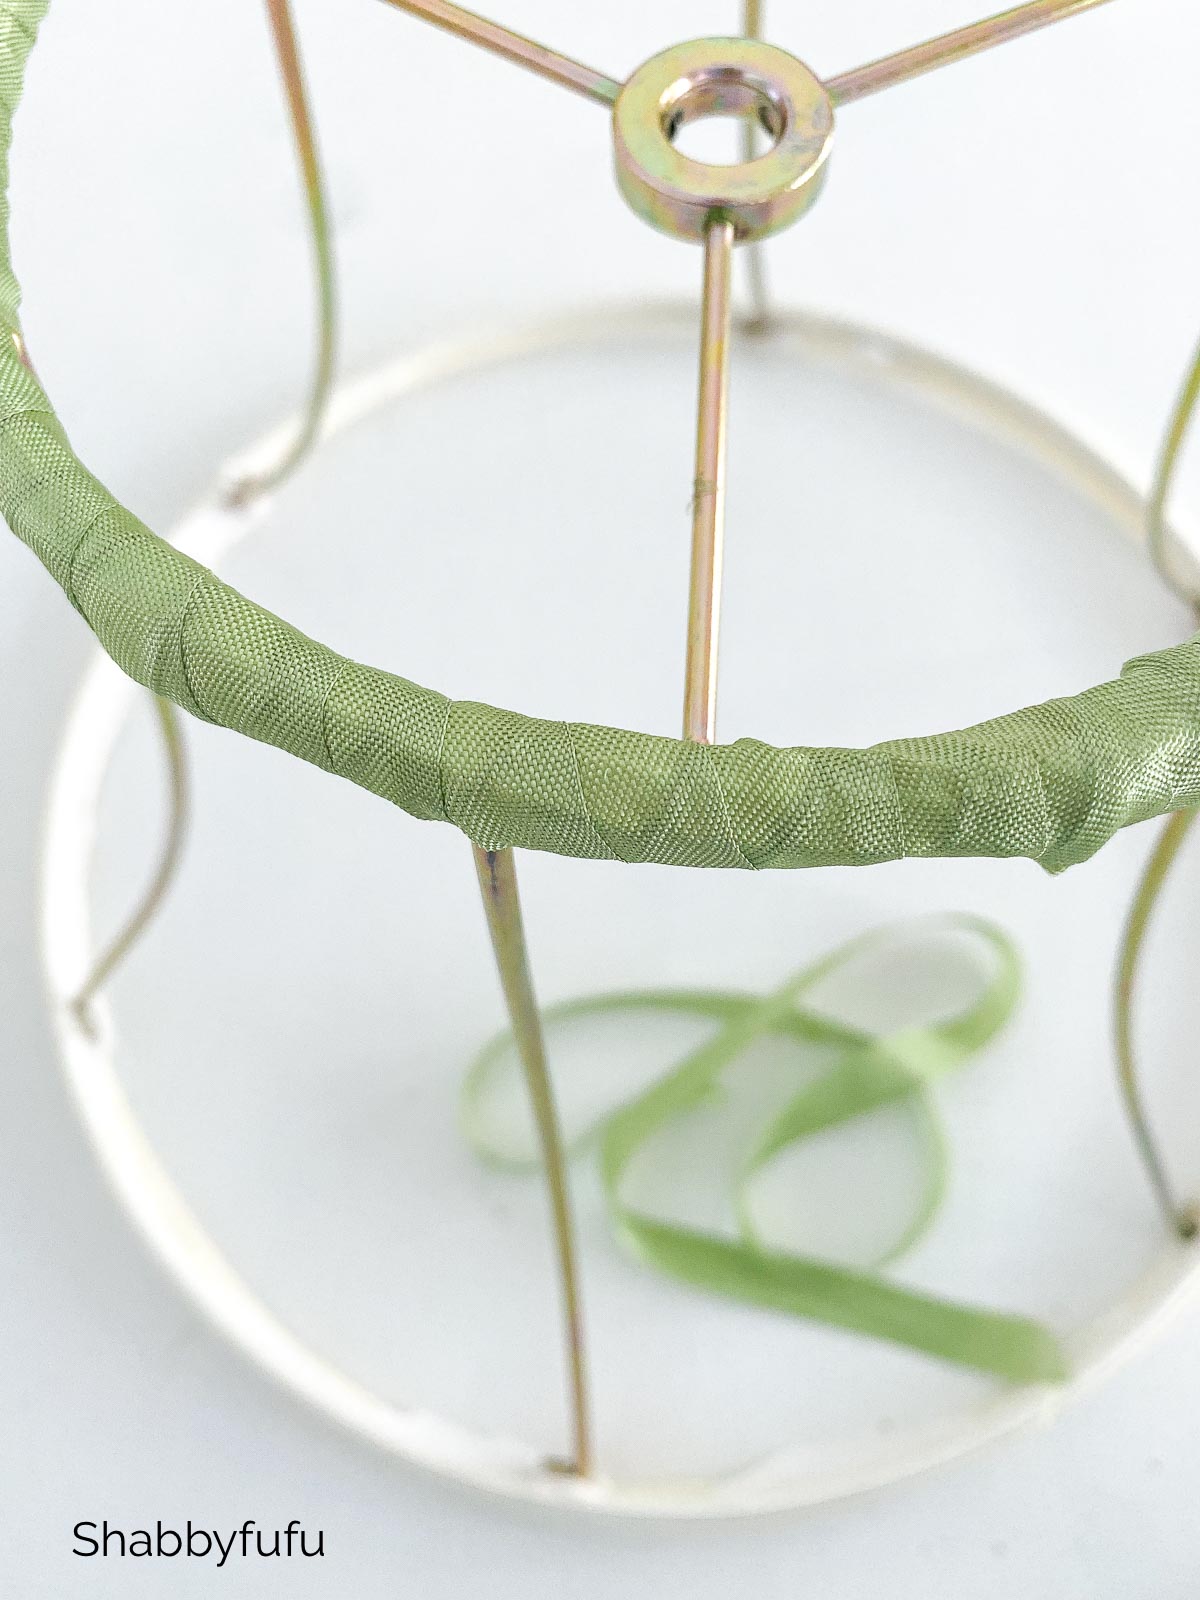 wrapping ribbon around the diy floral chandelier frame